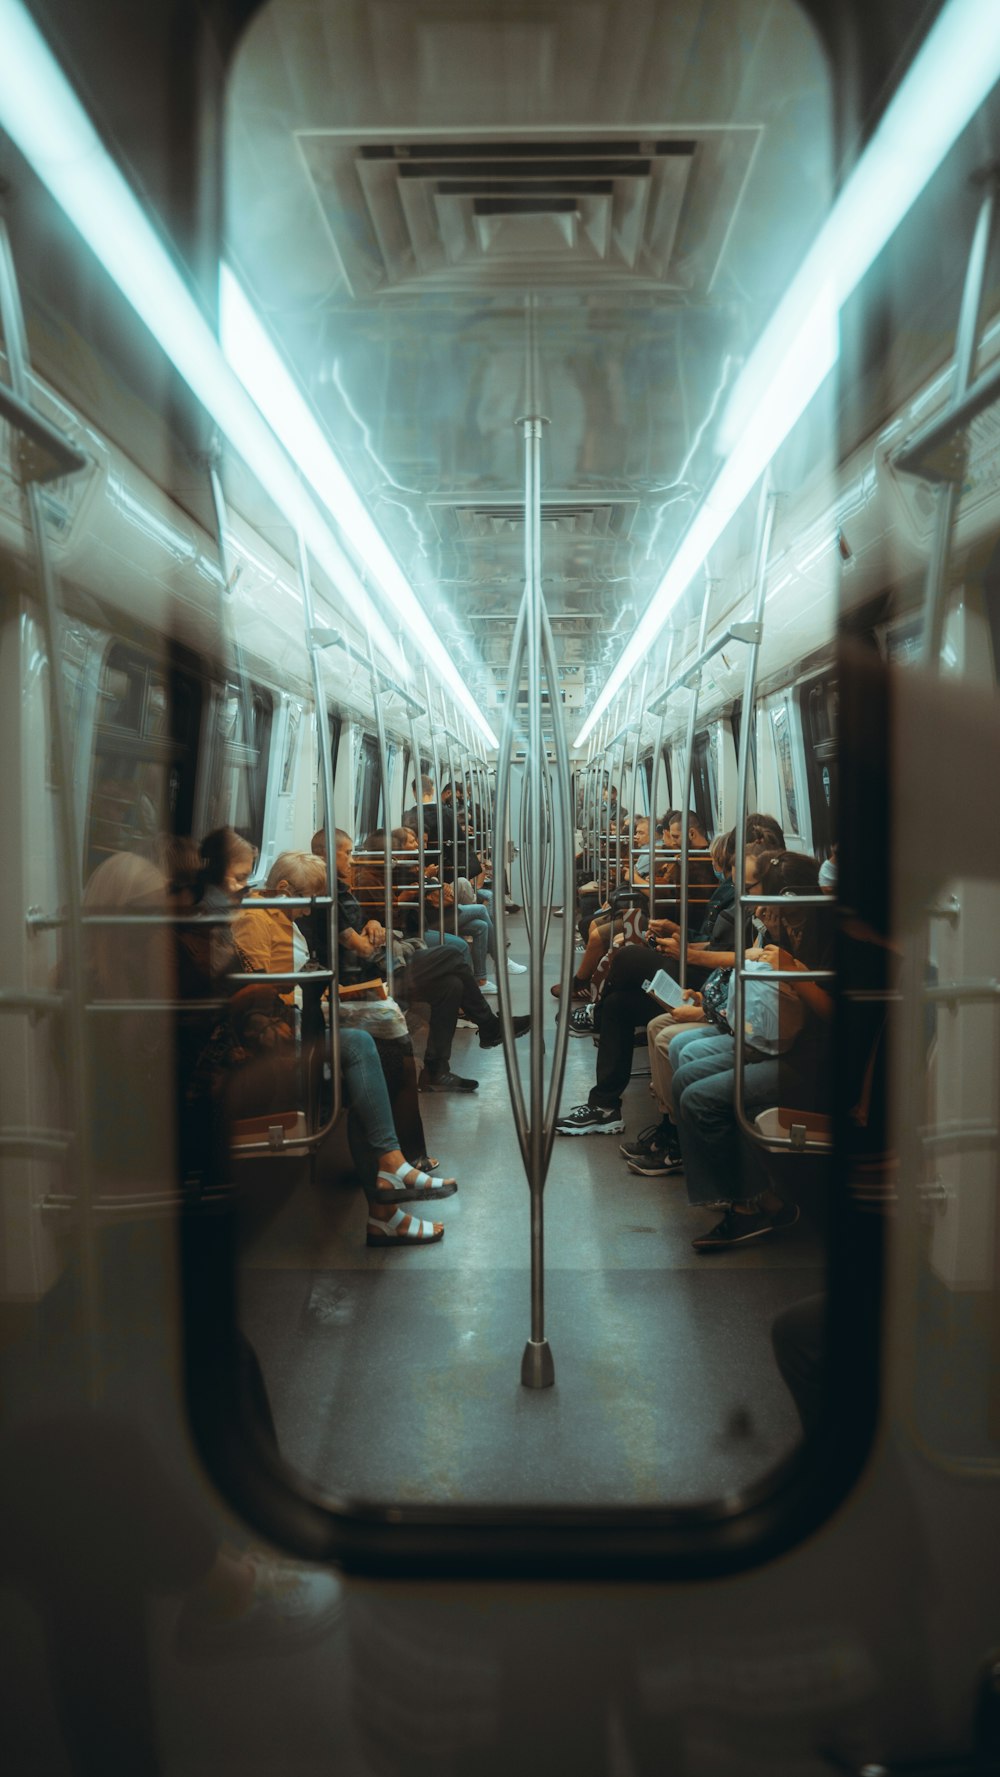 people sitting inside train during daytime